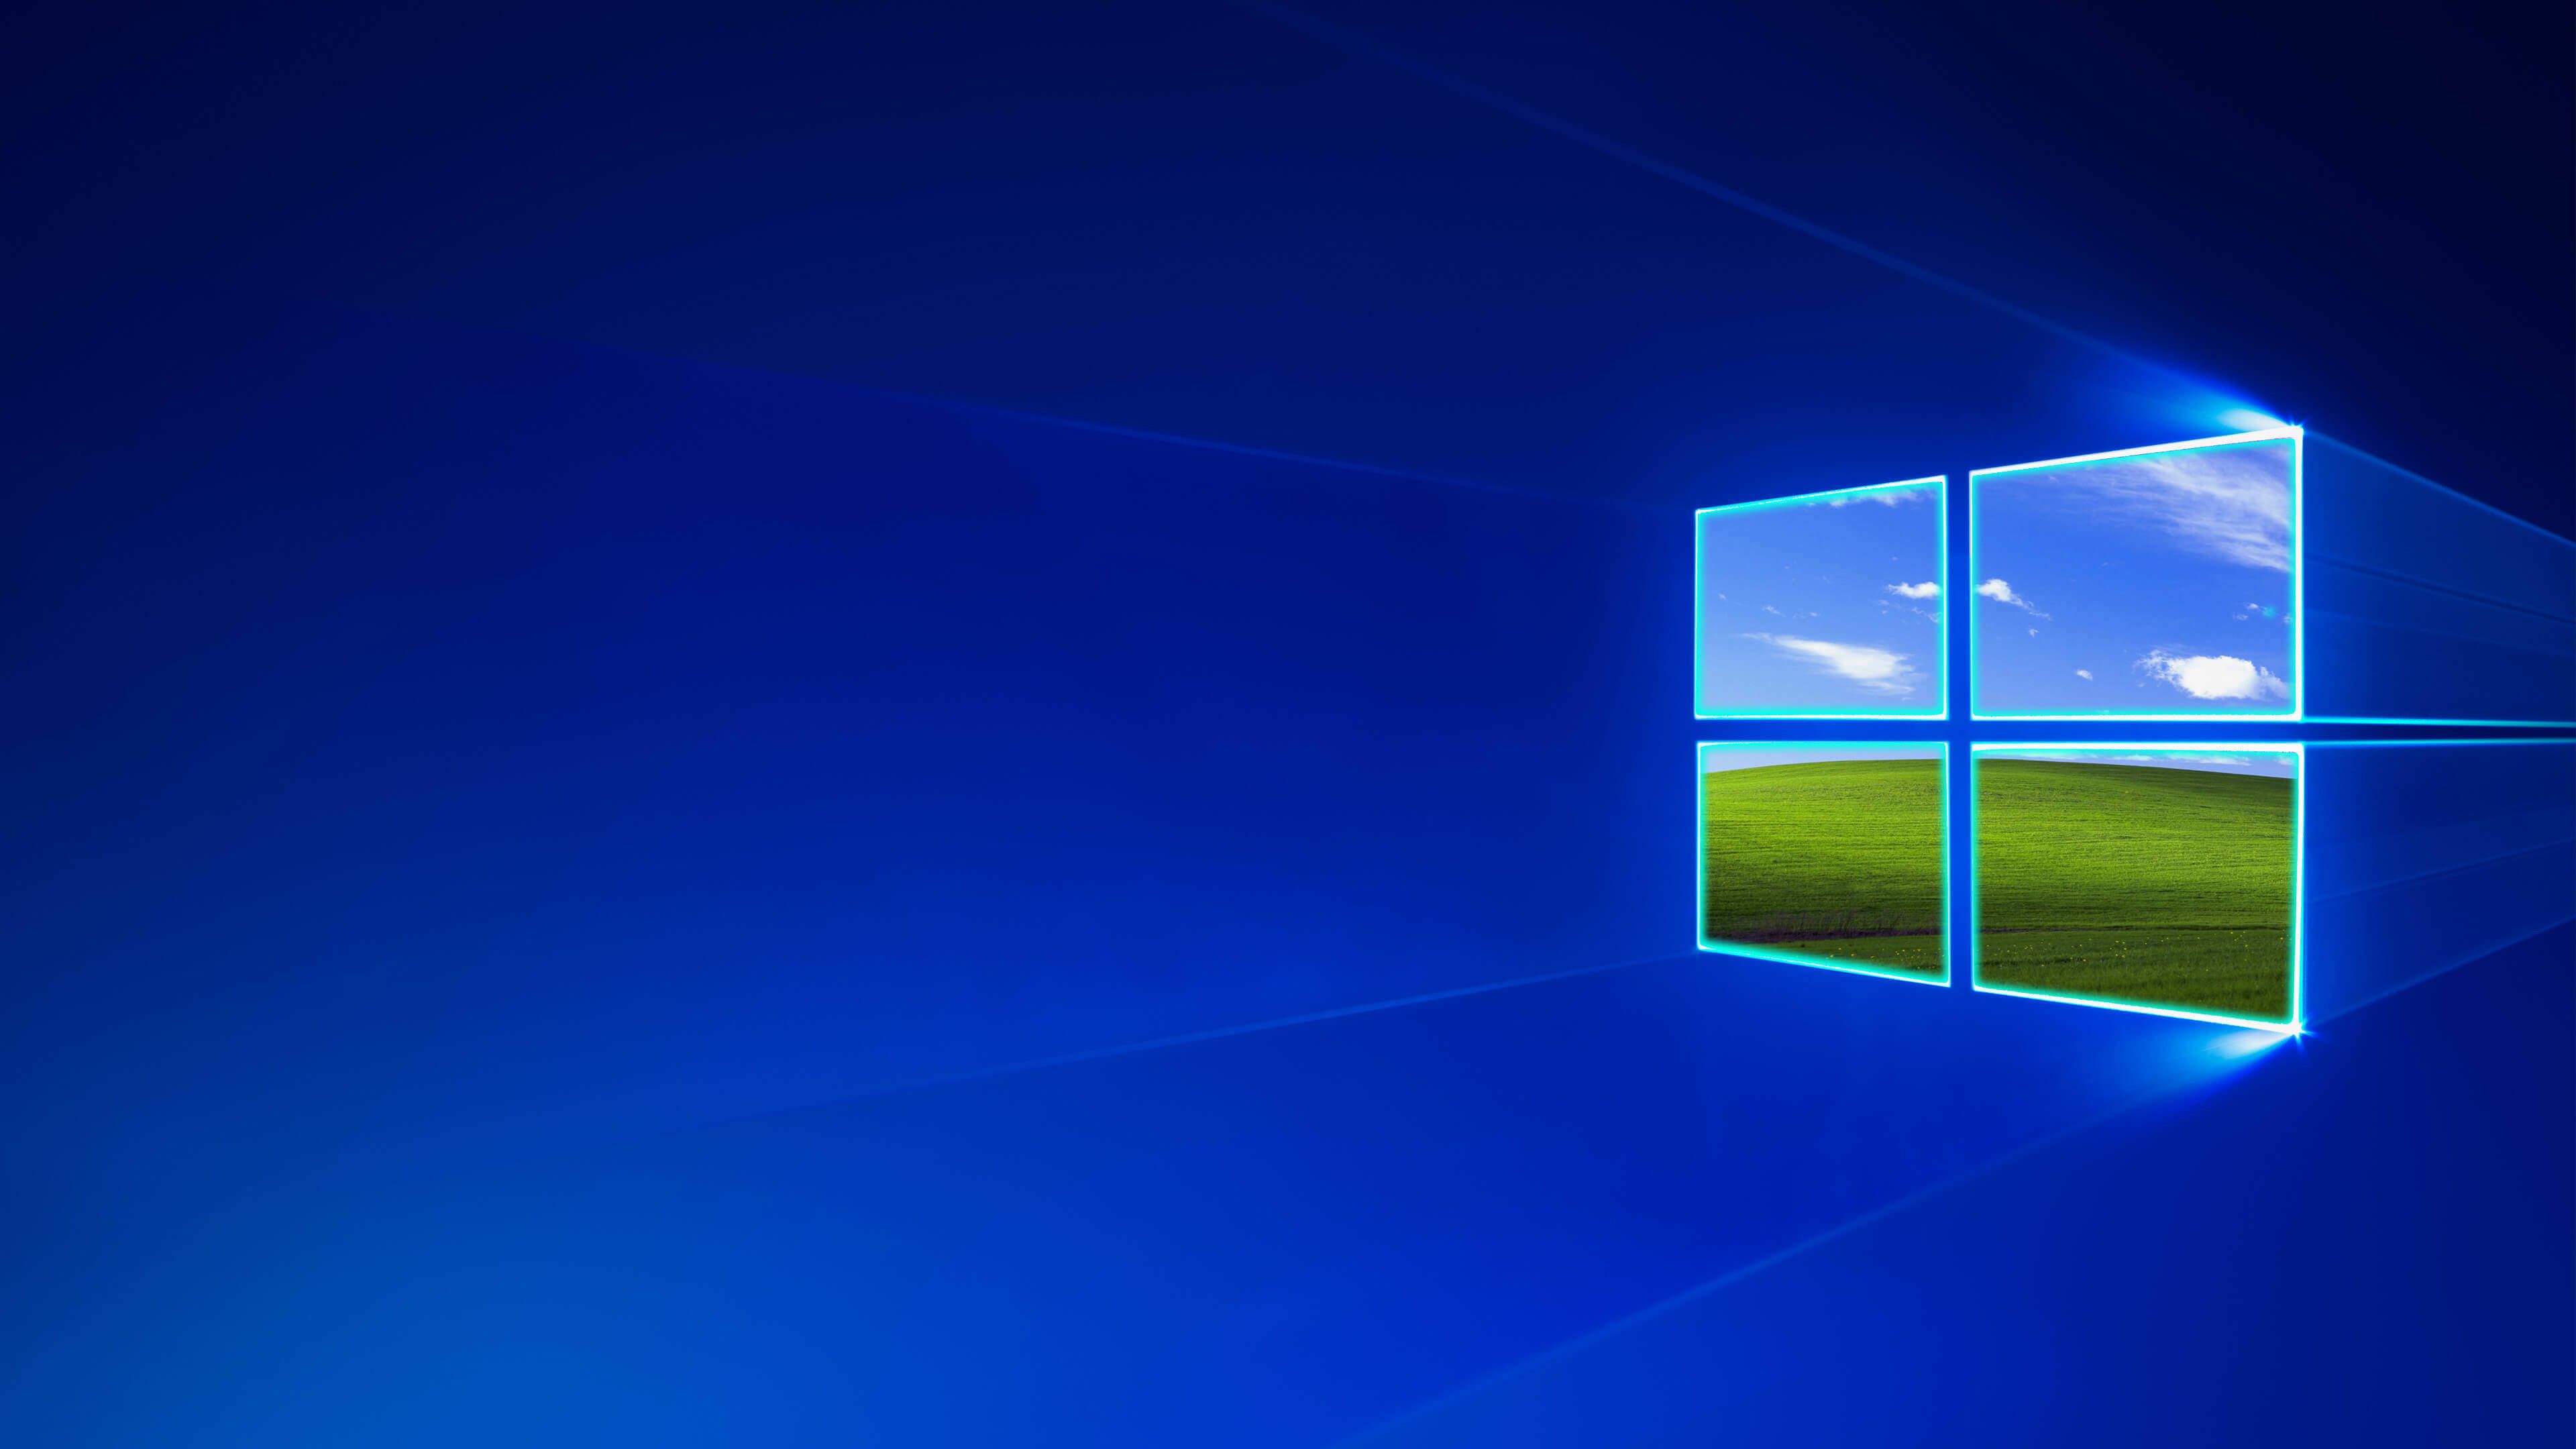 Windows 10 Professional Wallpapers